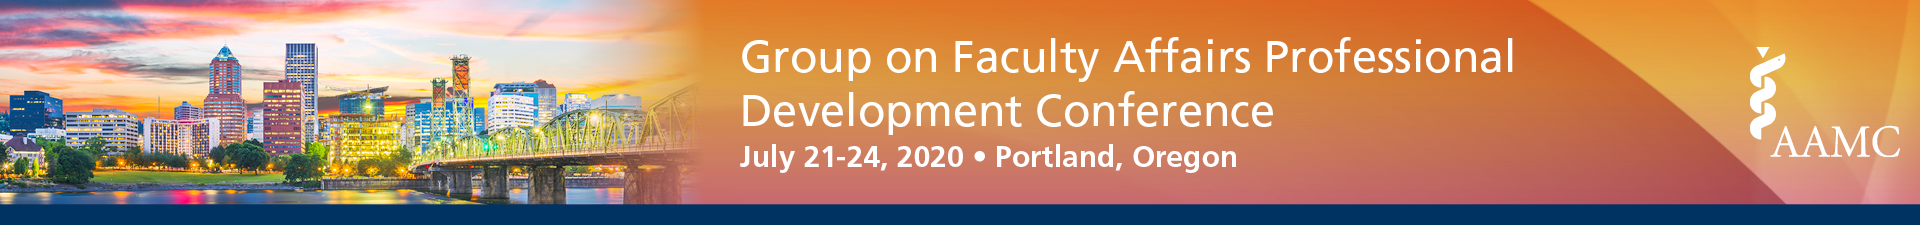 2020 Group on Faculty Affairs (GFA) Professional Development Conference Event Banner